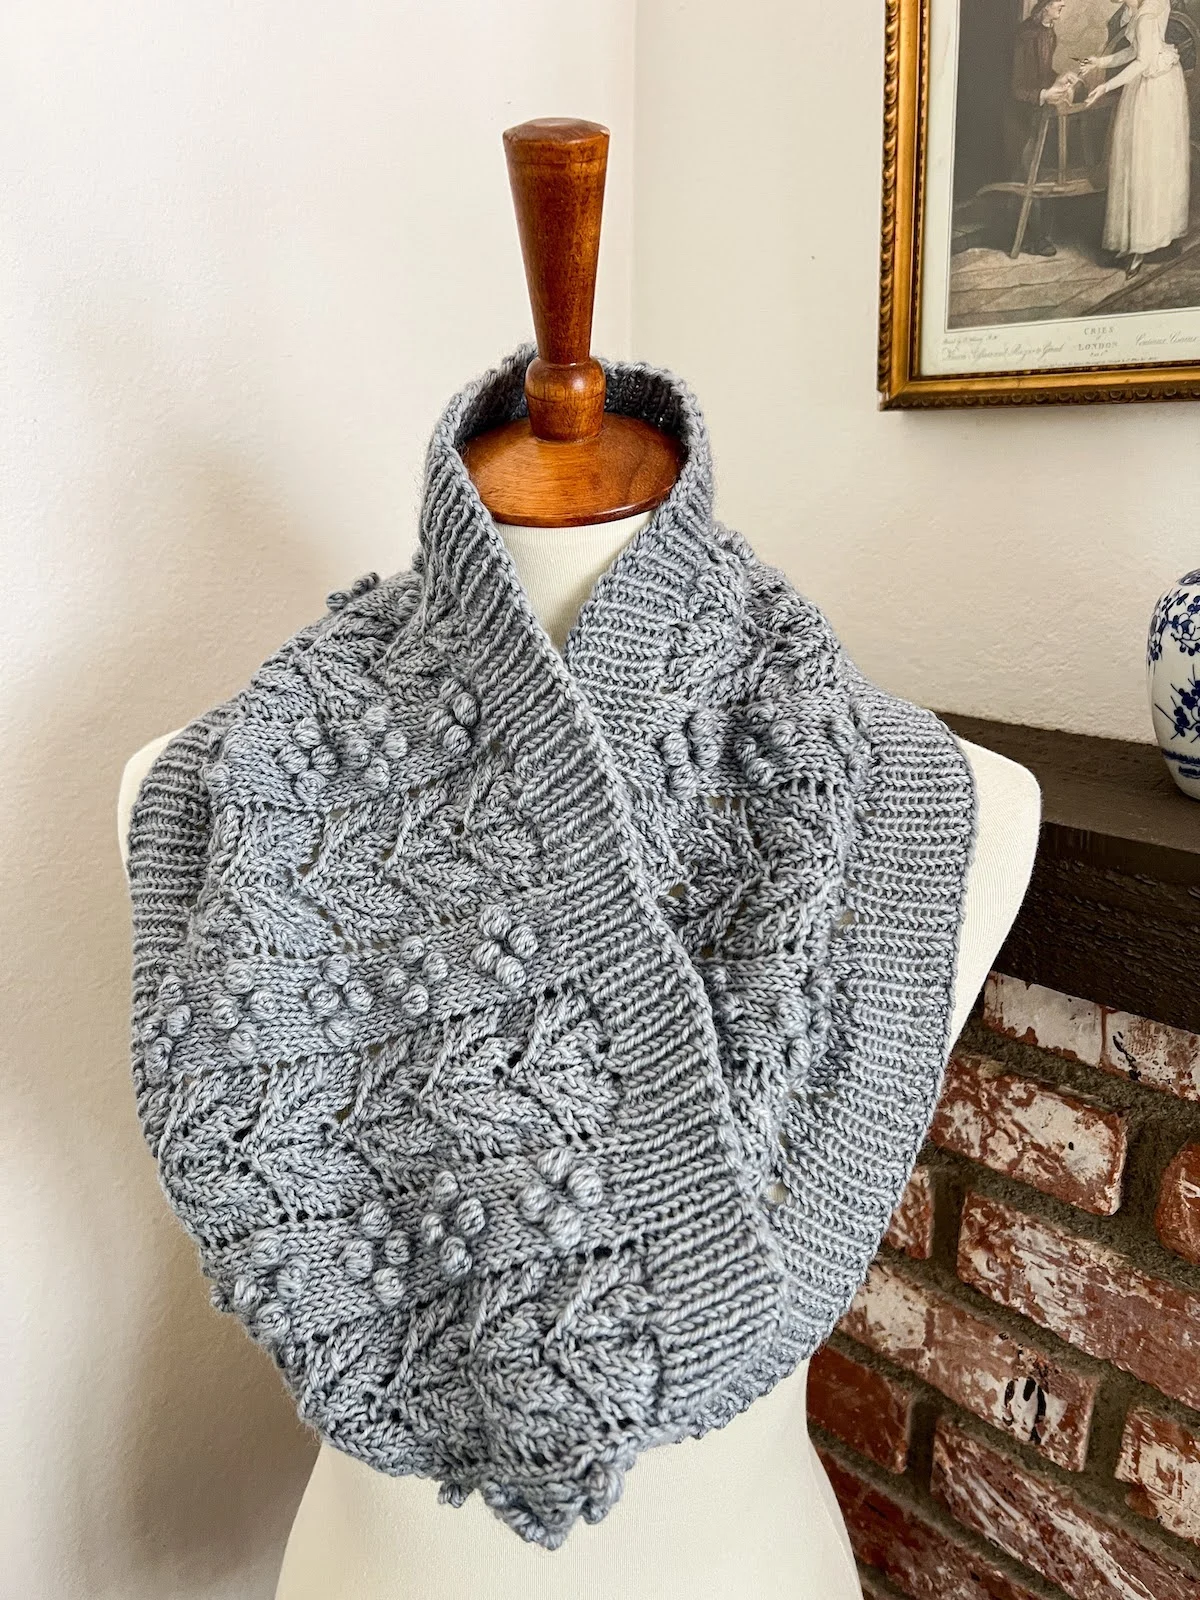 A light blue wool cowl is draped around the neck and shoulders of a dressmaker's form. The cowl features alternating columns of bobbles and lacy leaves, with 1x1 ribbing along the top and bottom for stability.